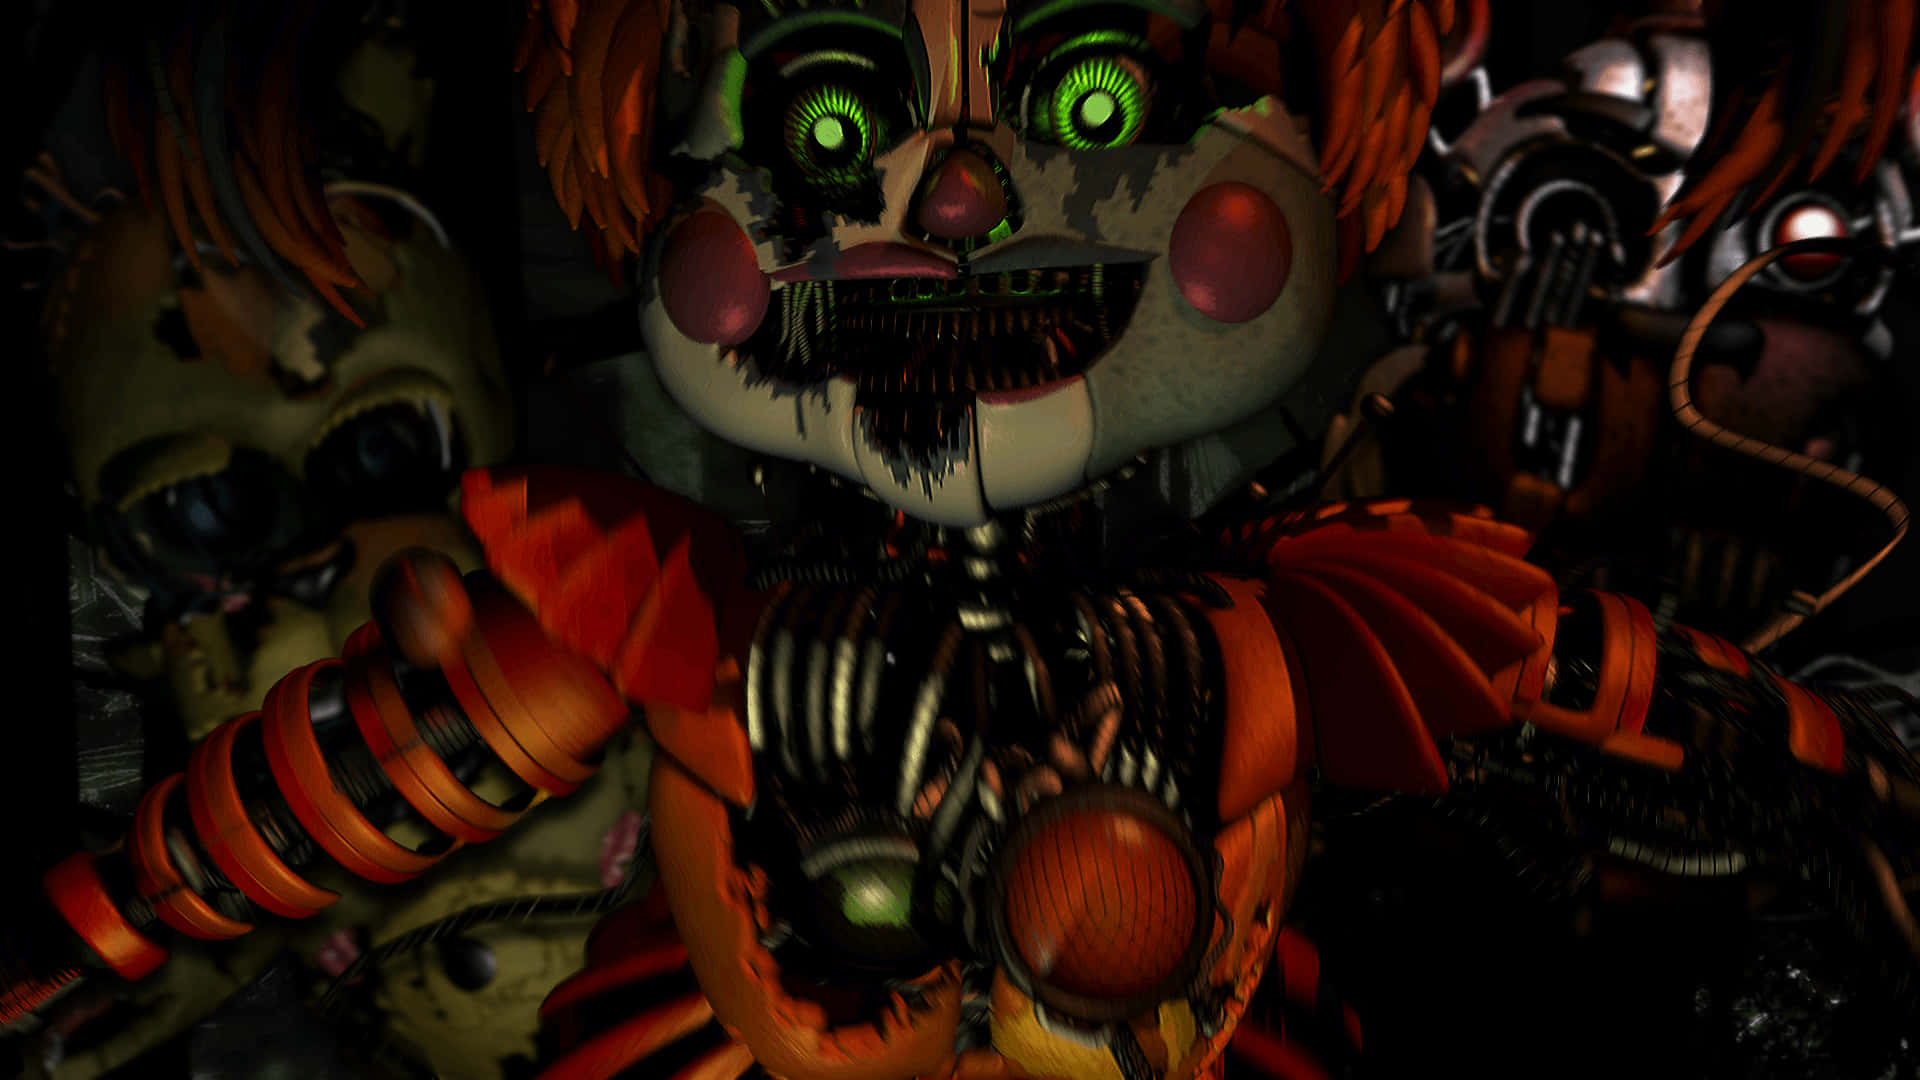 Mysterious Scraptrap Creature in Action Wallpaper